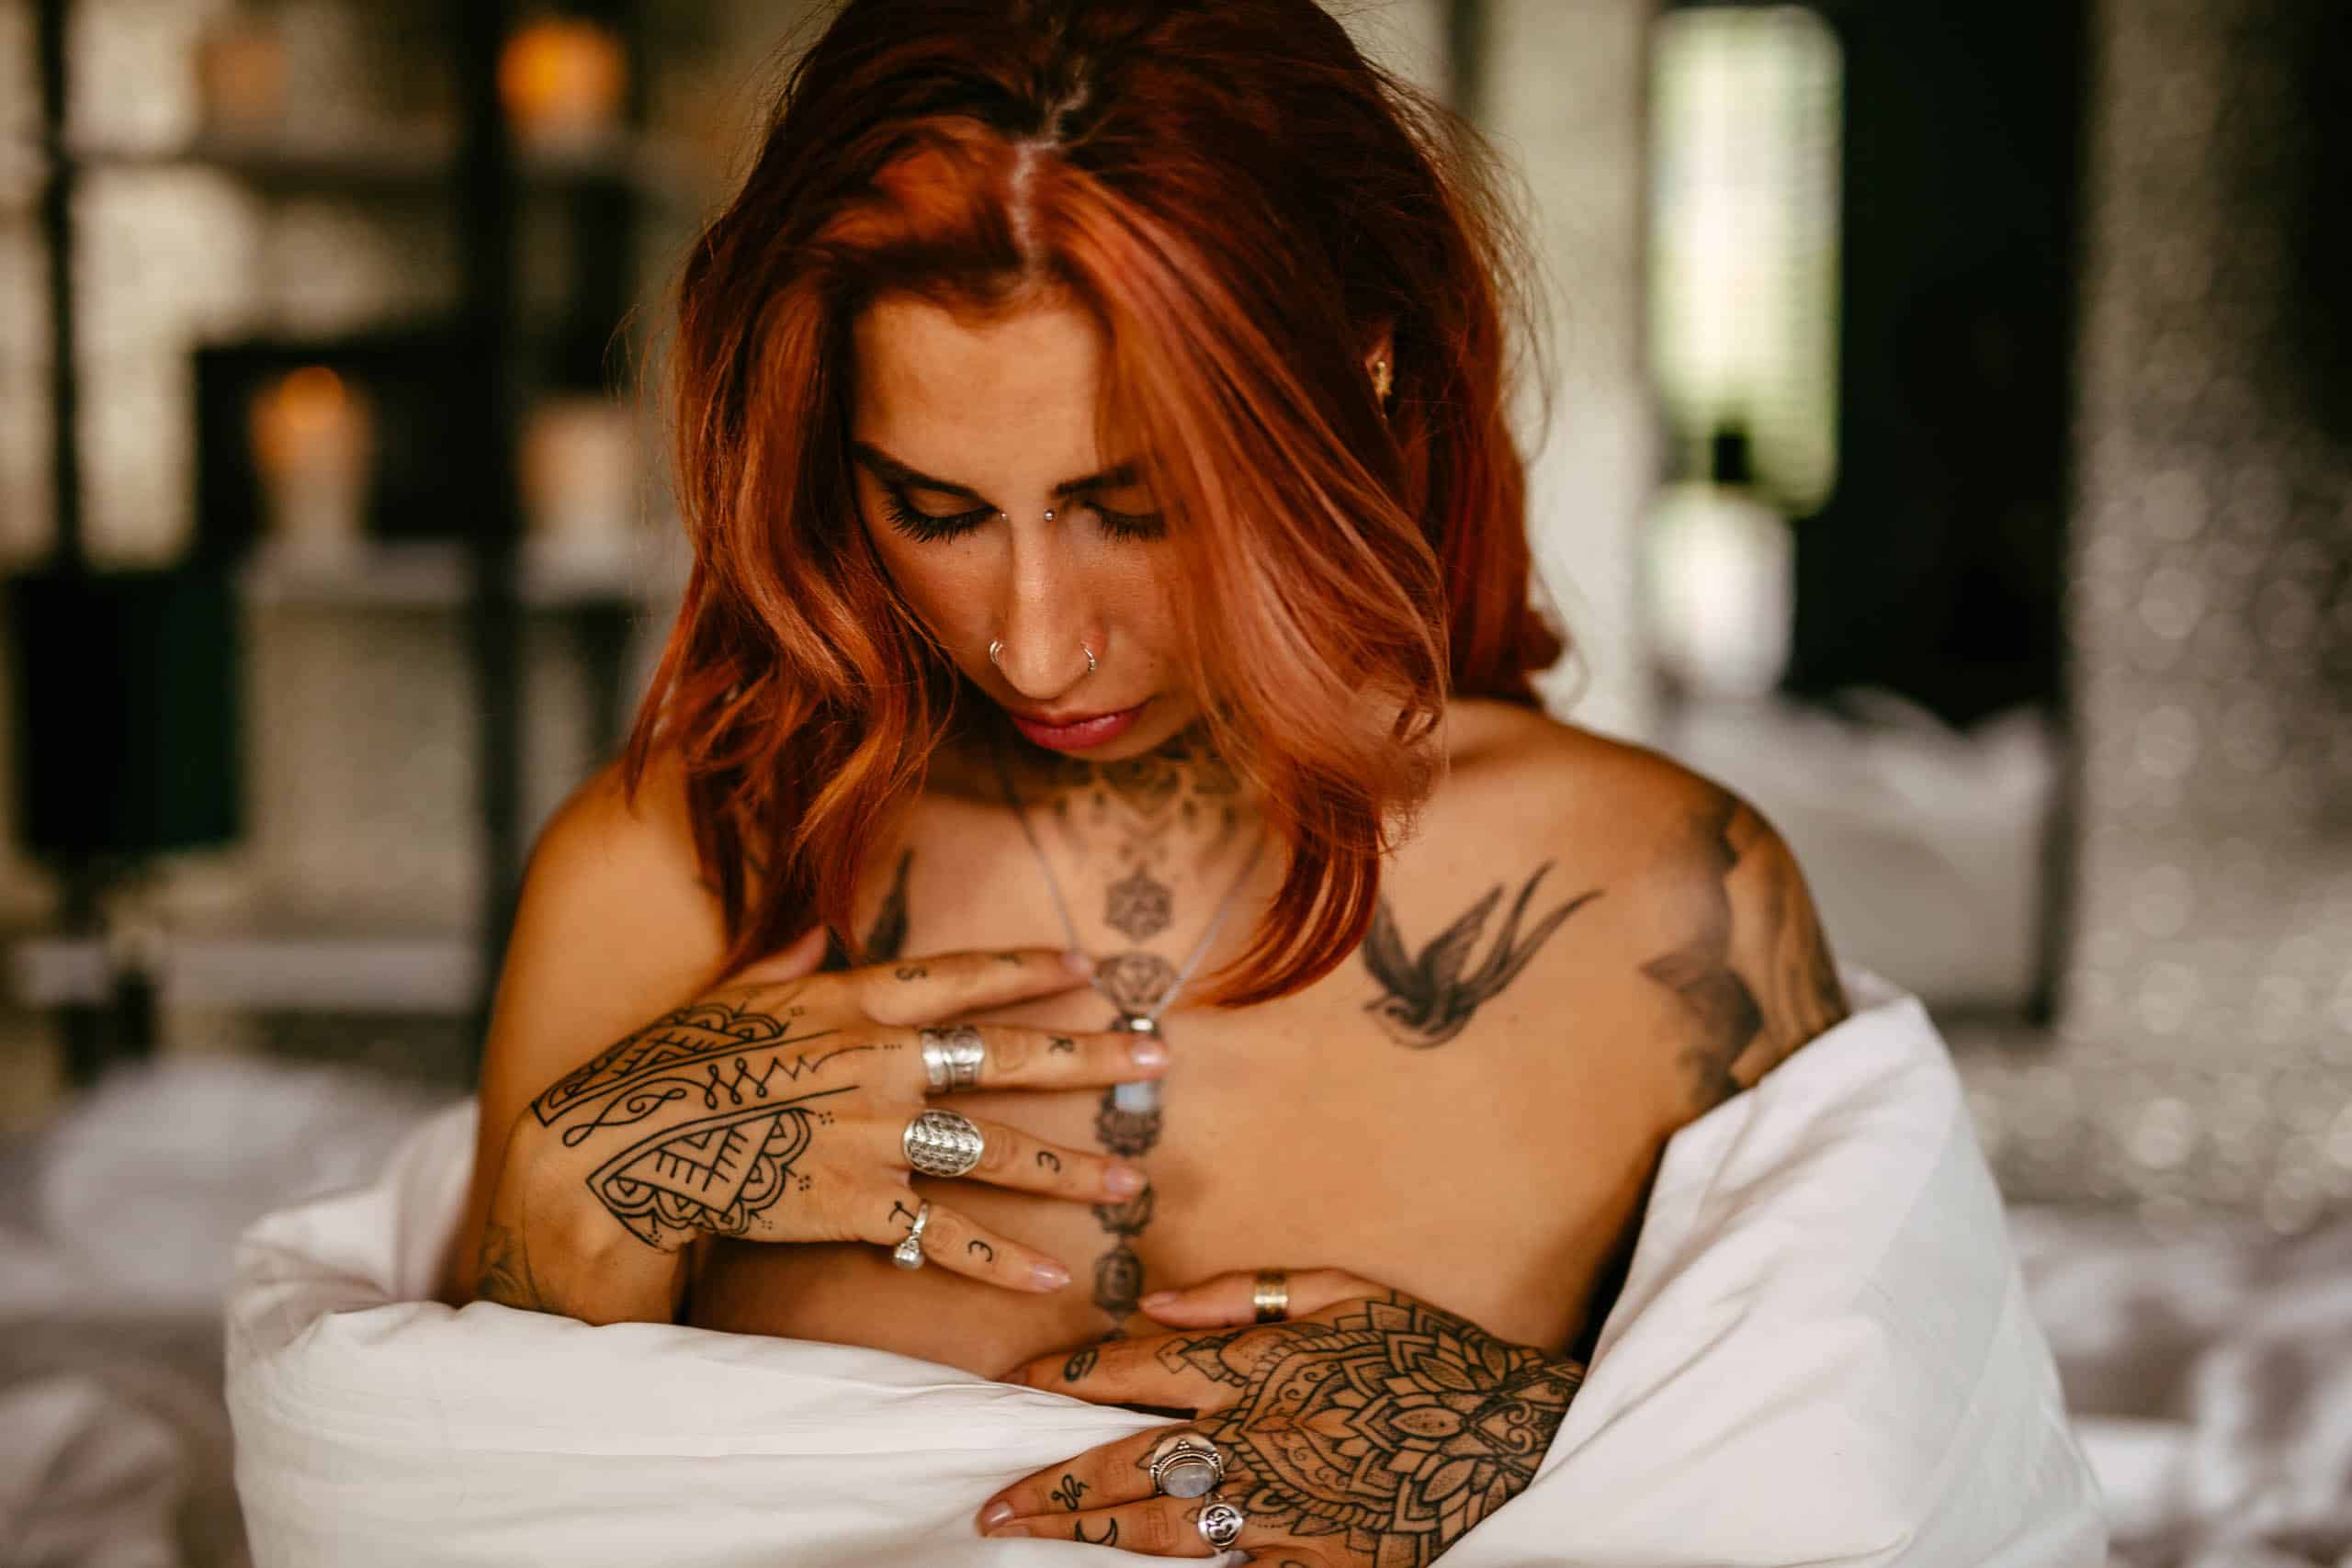 A woman with red hair and tattoos poses seductively during a boudoir shoot in Hoek van Holland.